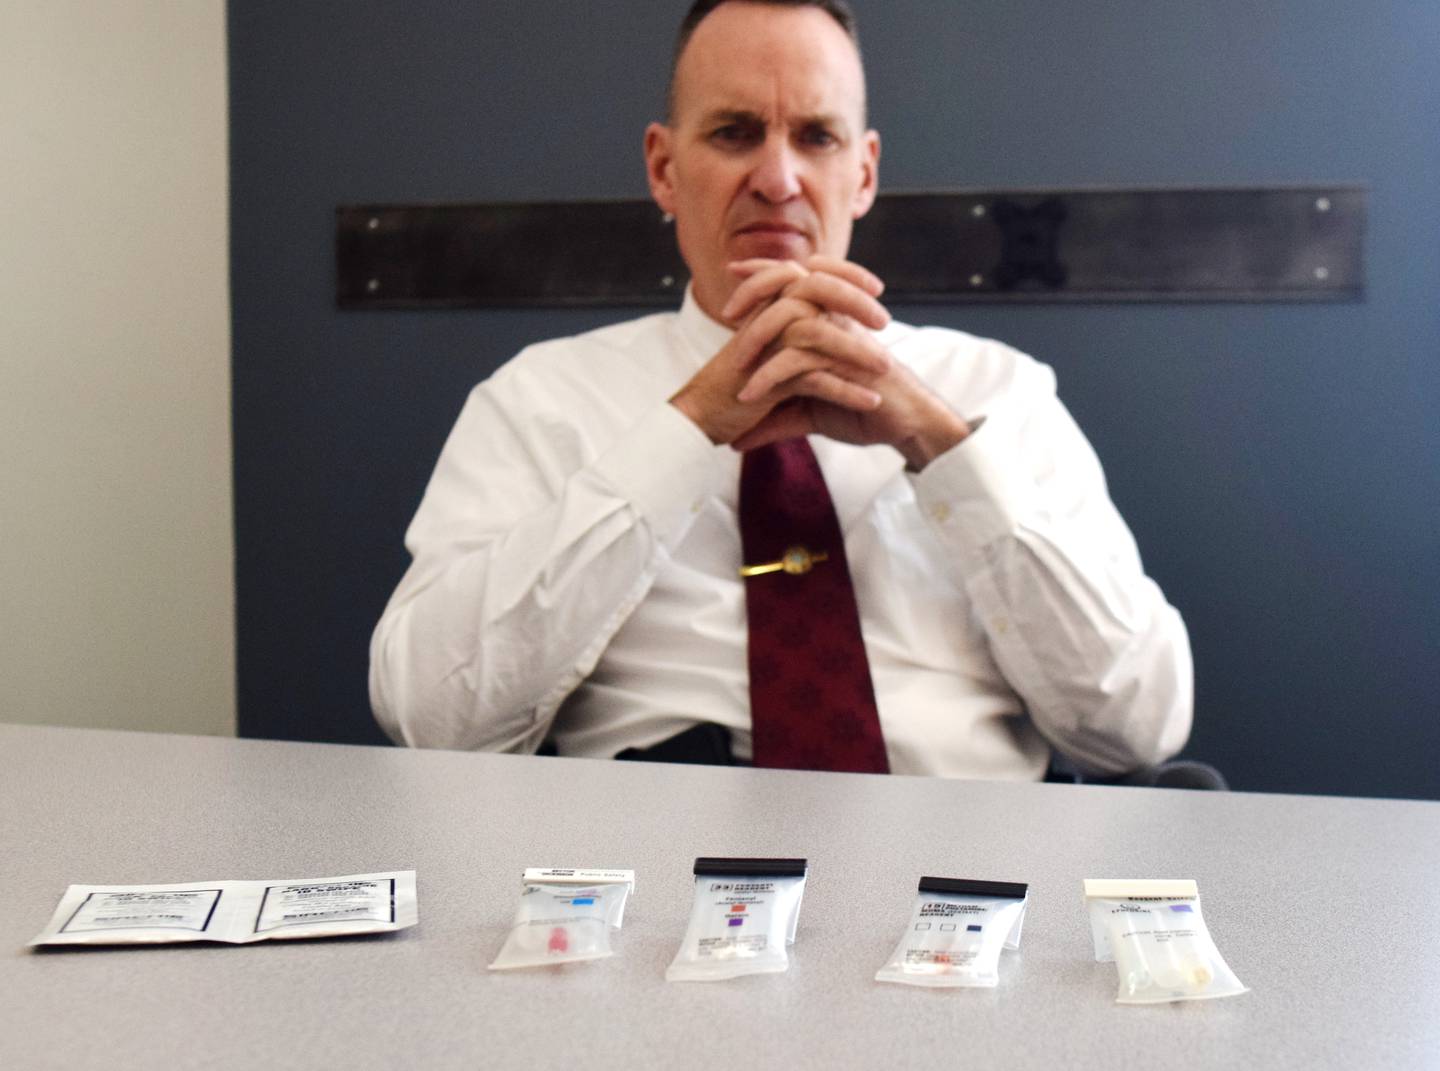 Lt. Brad Shutts of the Jasper County Sheriff's Office inspects the field tests deputies currently use to identify controlled substances. But soon the sheriff's office will get its hands on a TruNarc analyzer, which will allow for much easier identifications of drugs.